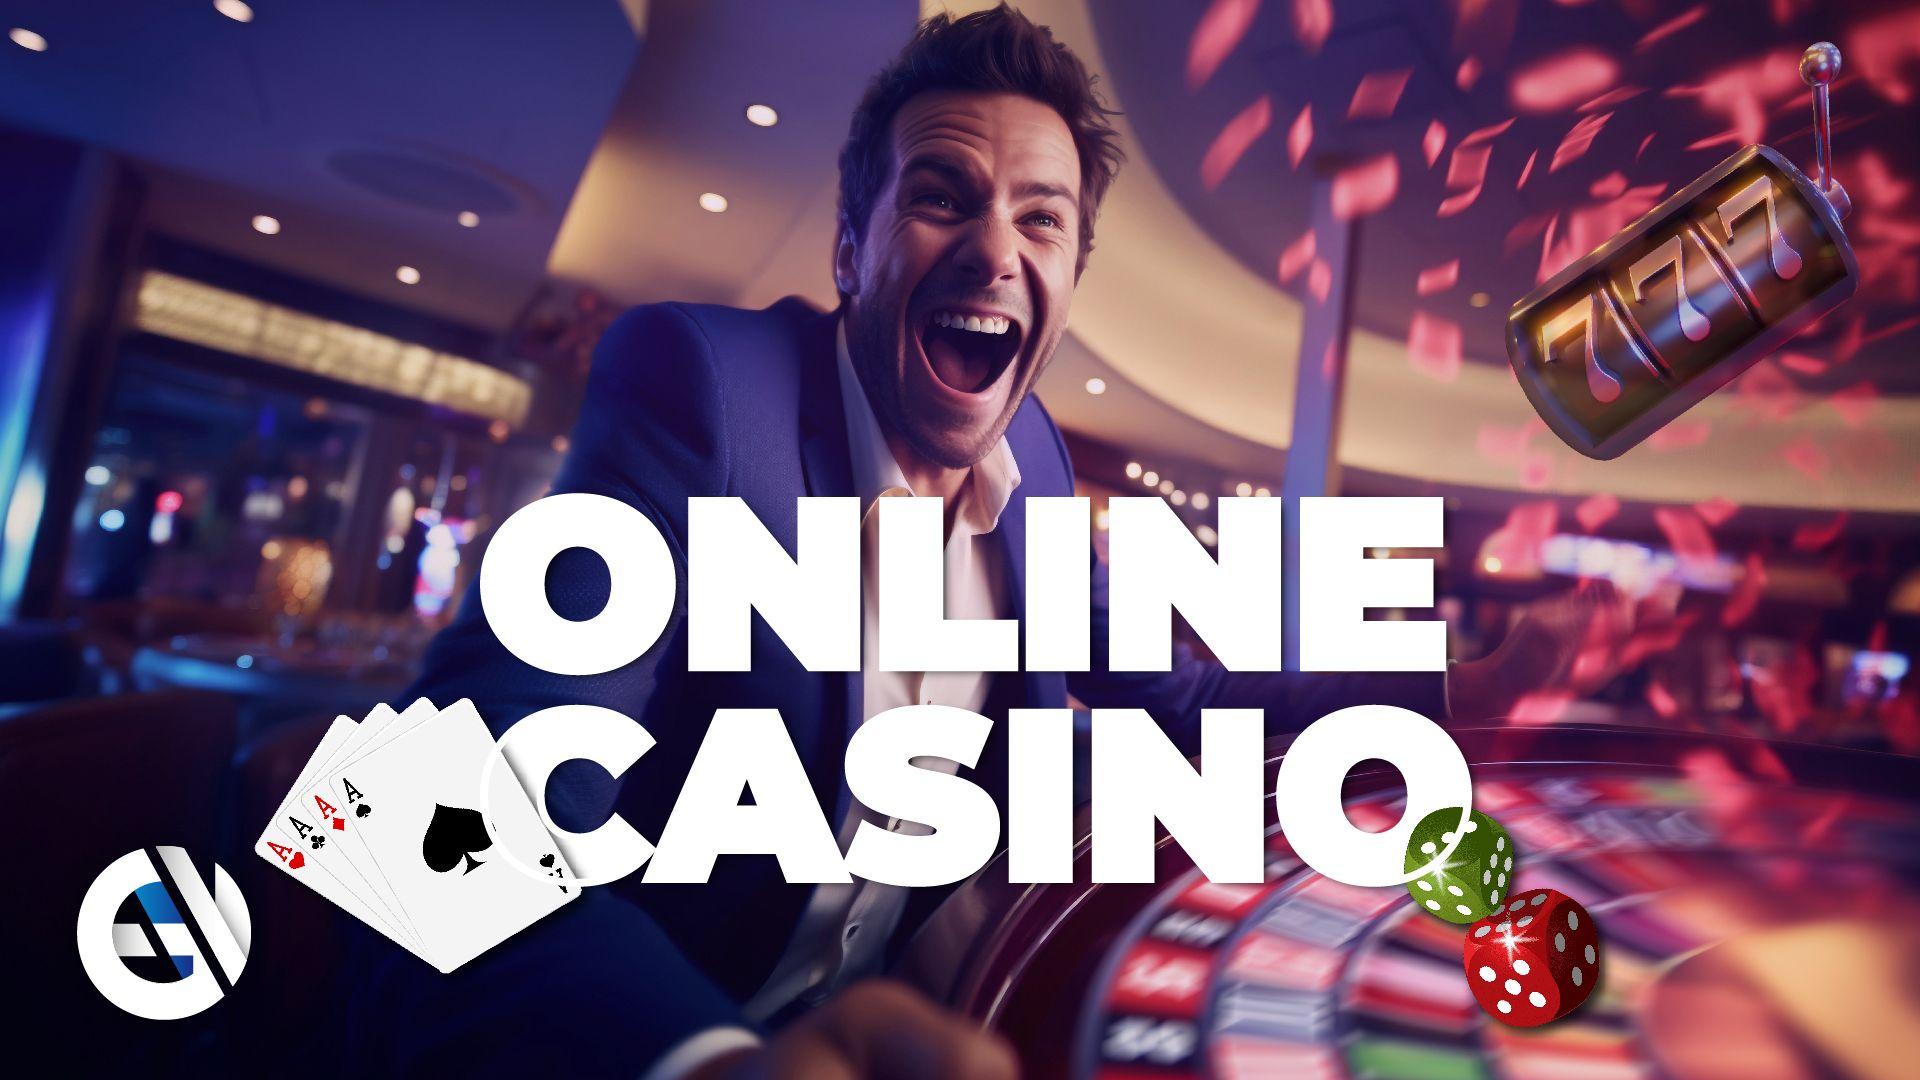 How to find and choose from the latest online casinos - The most important things to check before you play